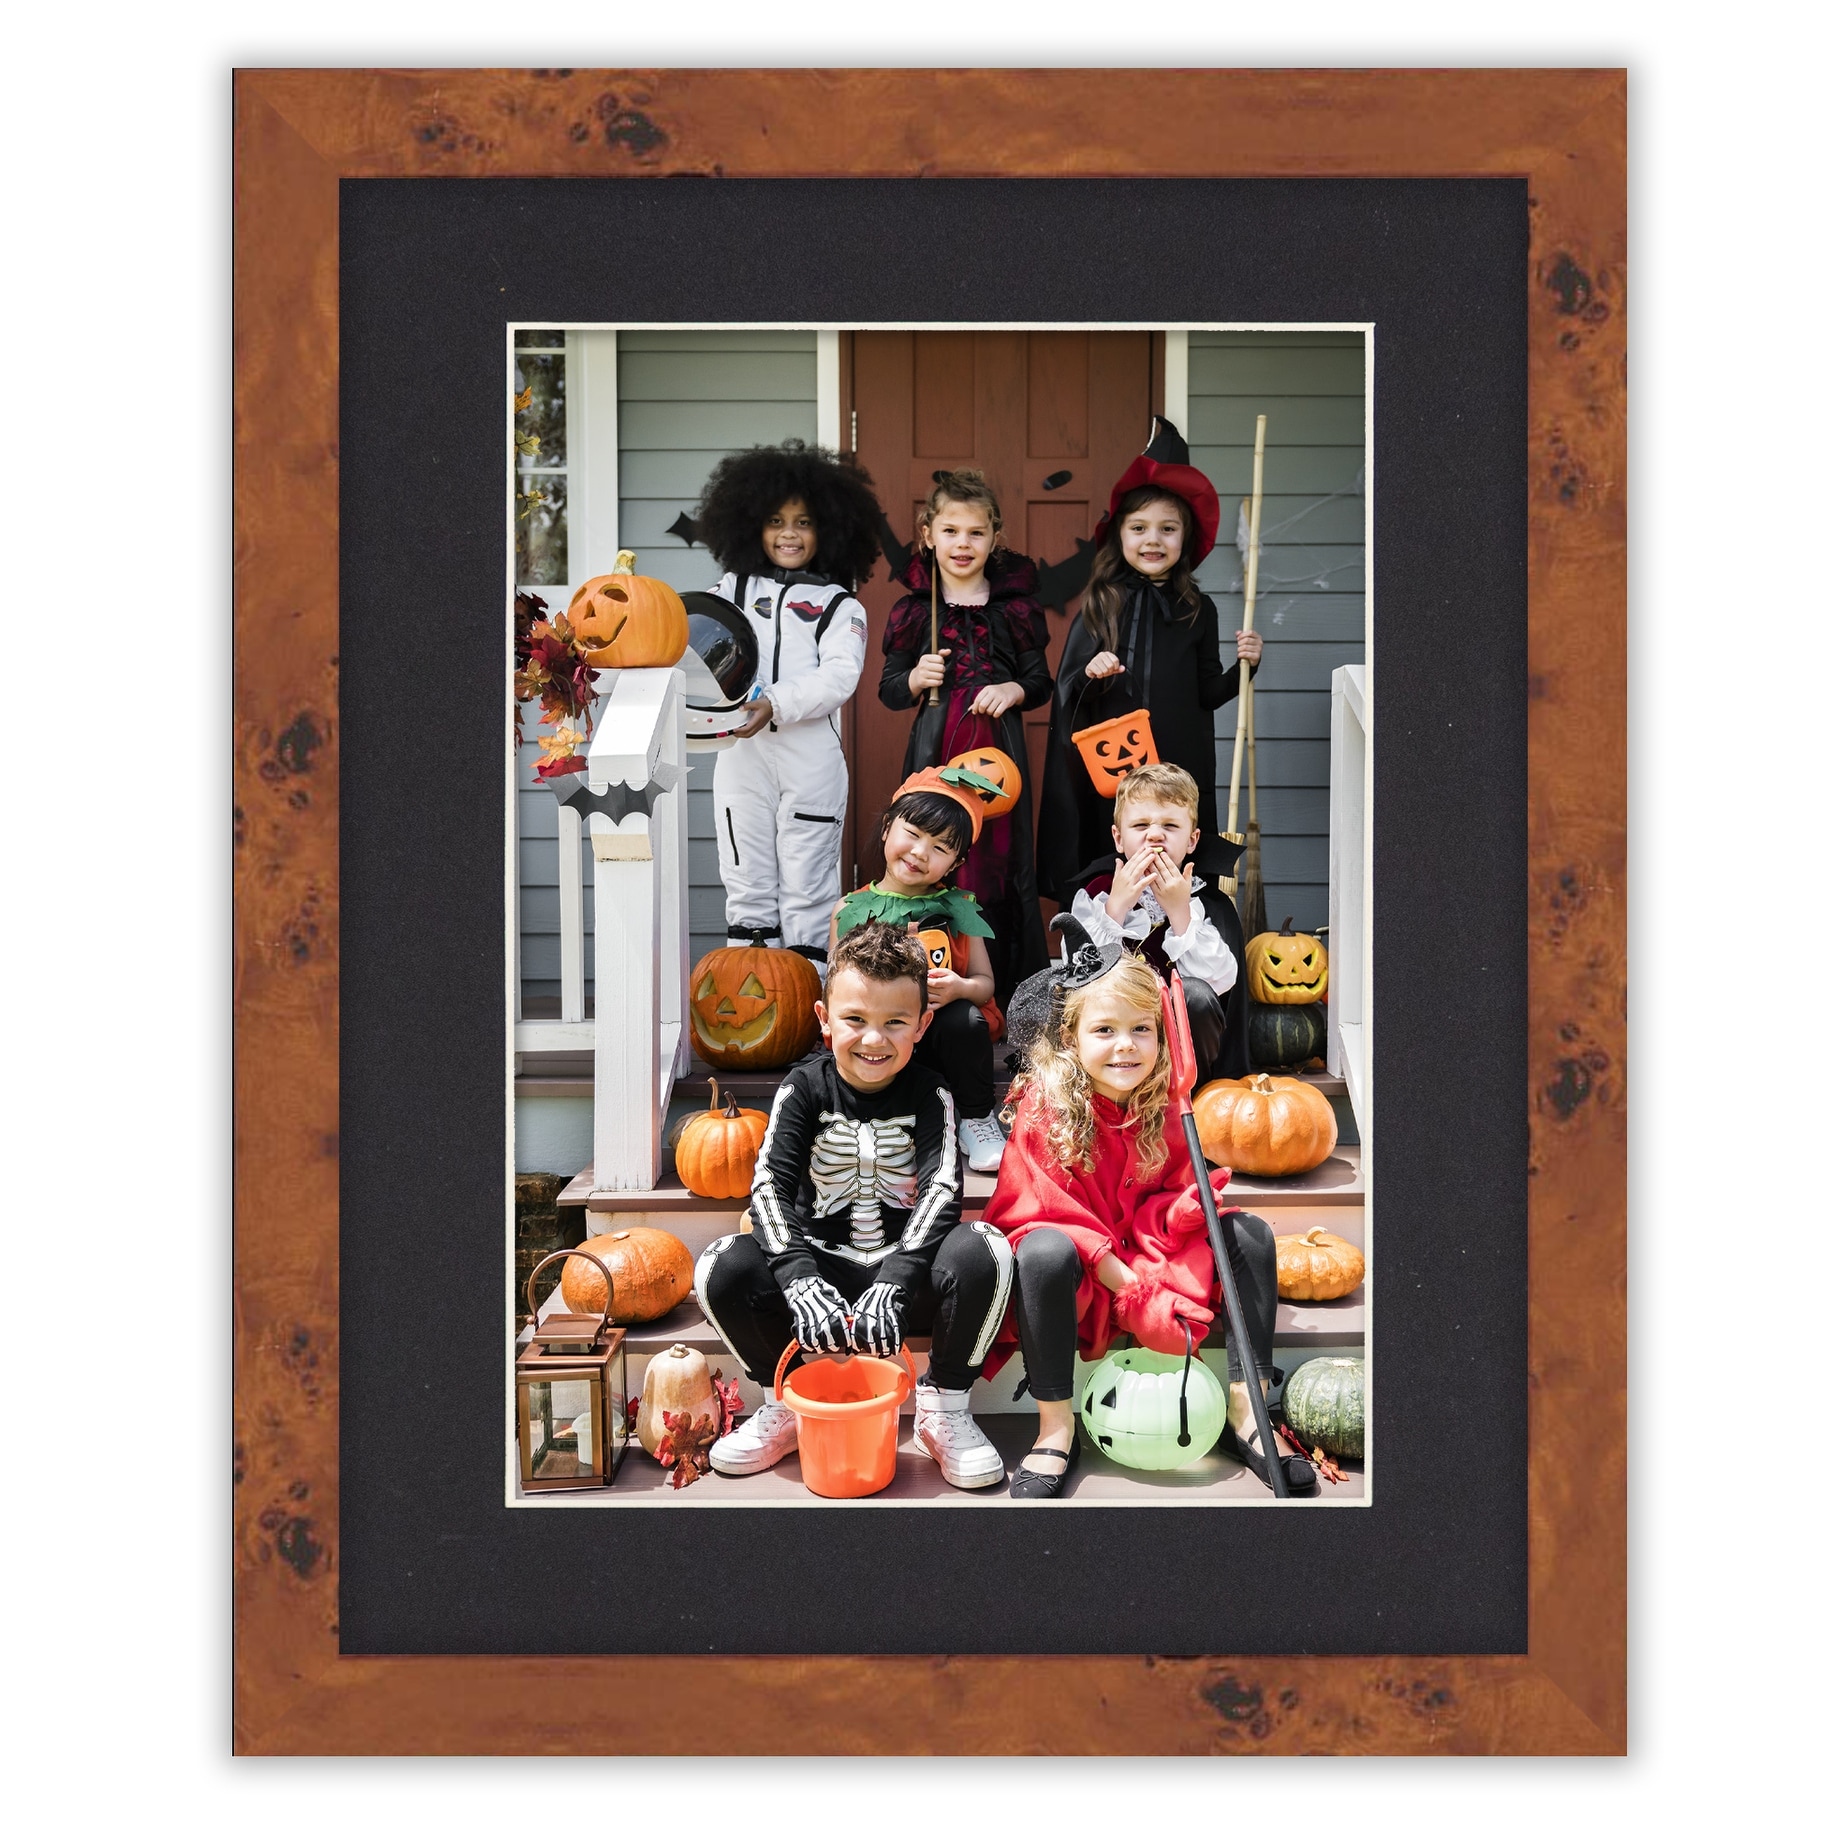 5x7 Mat for 8x10 Frame - Precut Mat Board Acid-Free Black 5x7 Photo Matte  Made to Fit a 8x10 Picture Frame - Bed Bath & Beyond - 38872561